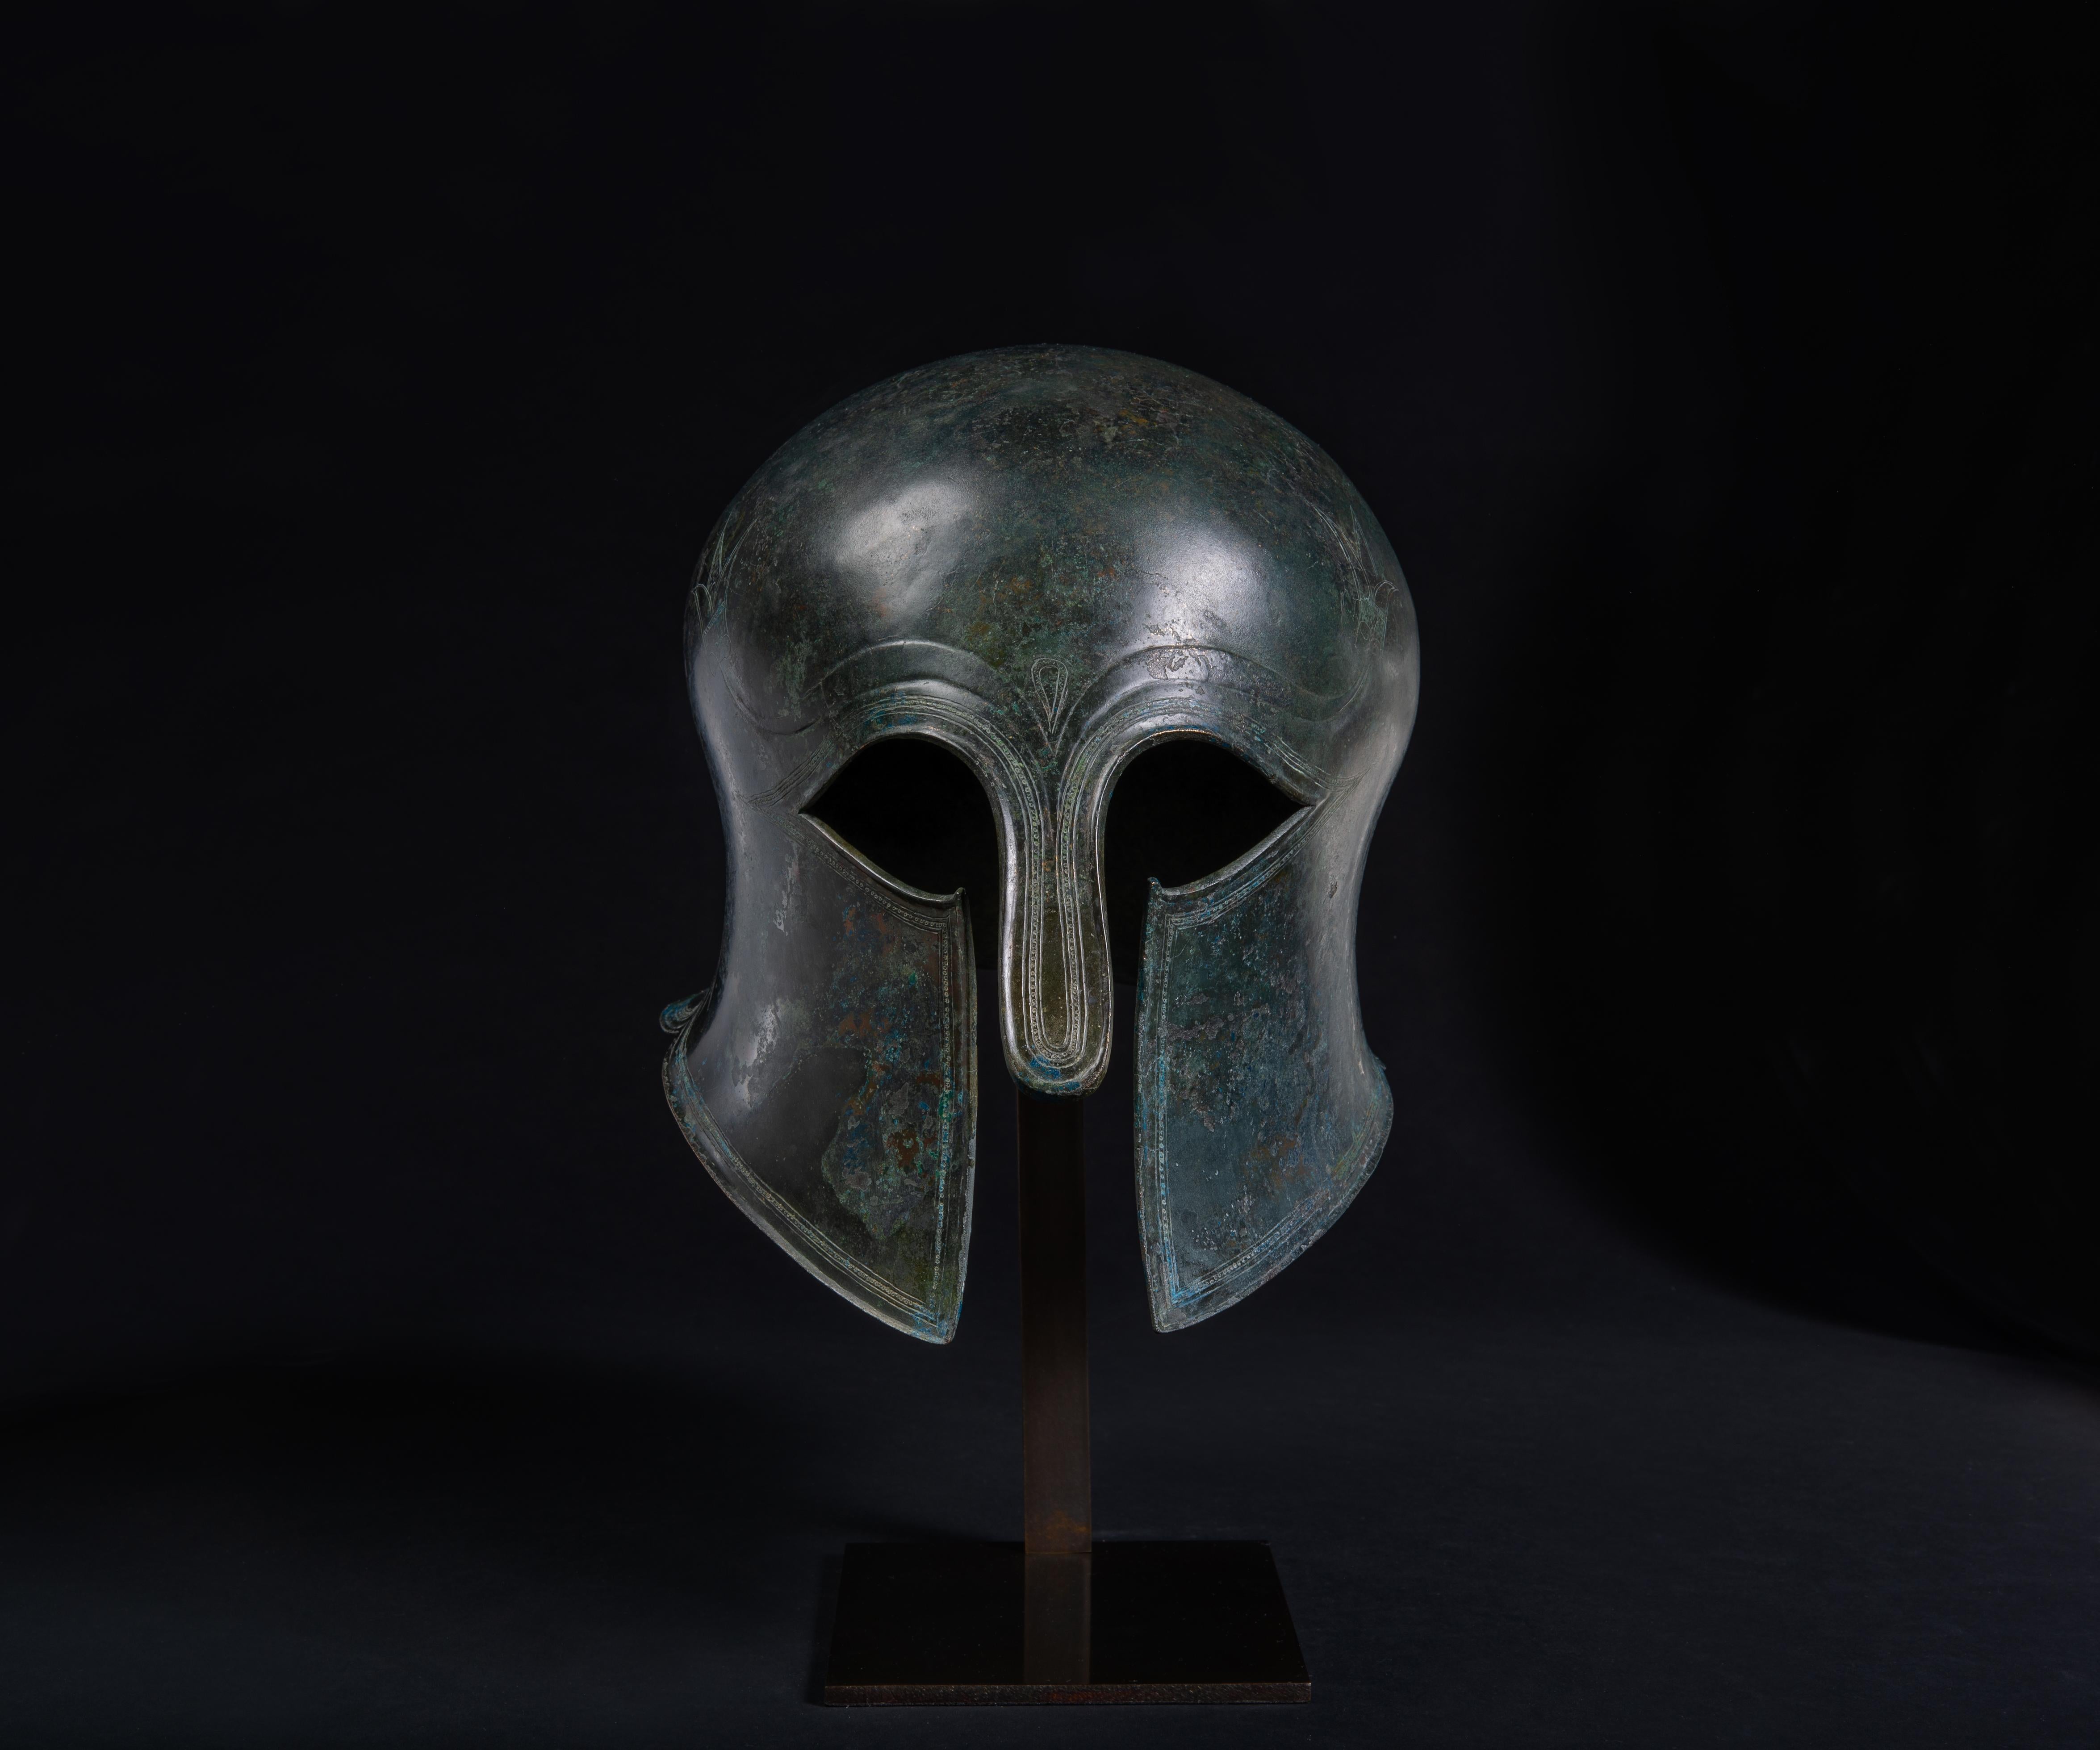 Corinthian helmet with Bull Horns and Lotus Flower Decoration.
Archaic Period, c.550-500 BC.
Cast, hammered and incised bronze.

An exceptionally well preserved example of one of the most iconic ancient Greek artefacts. This is the finest and best